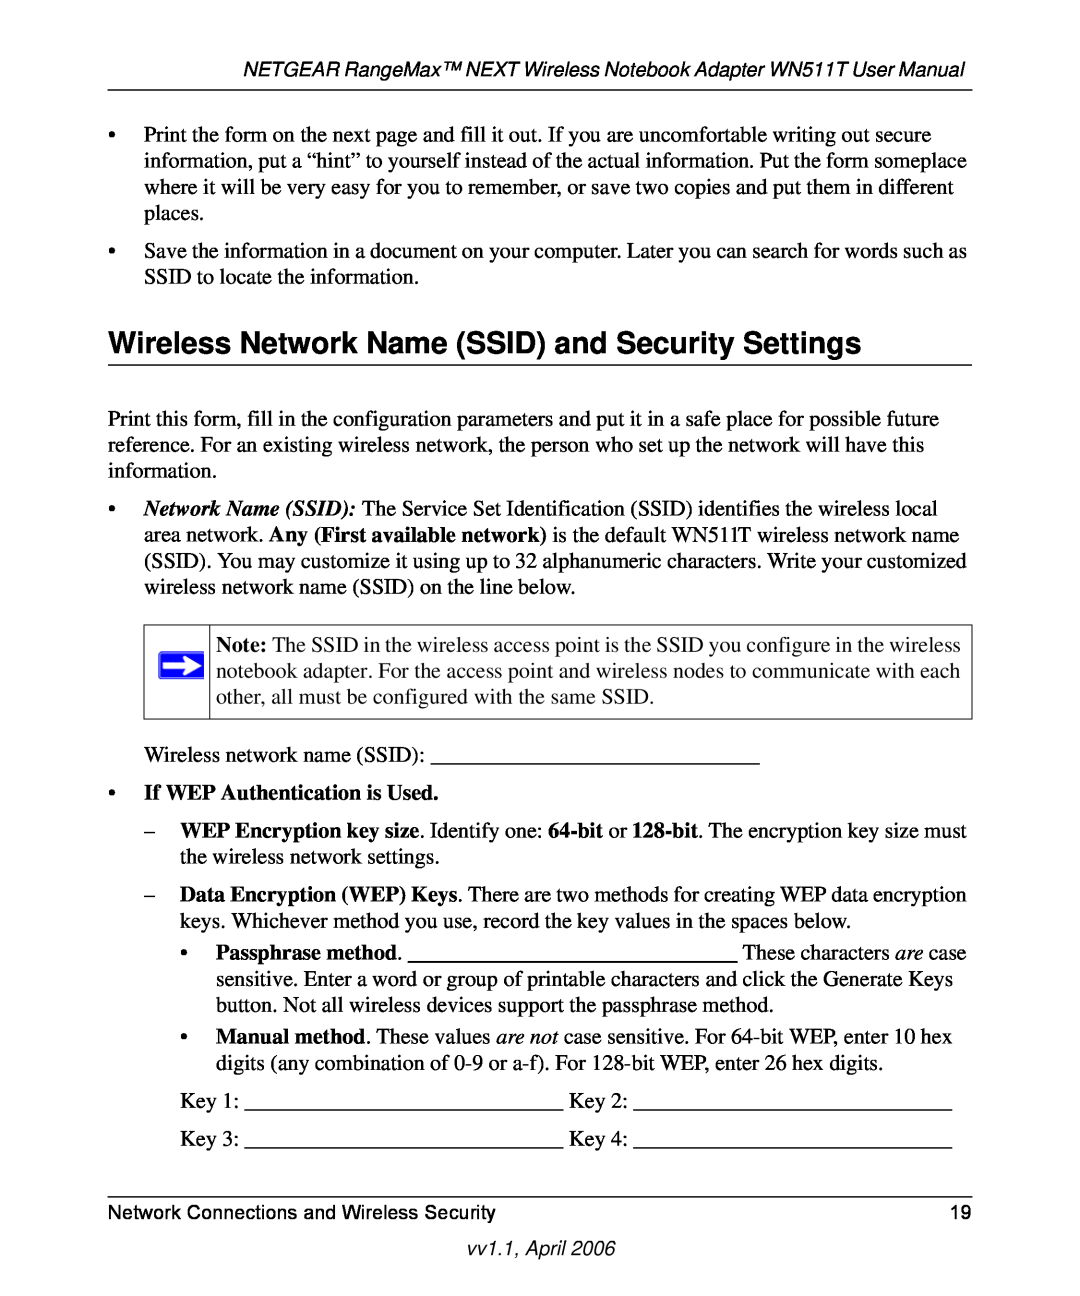 NETGEAR WN511T user manual Wireless Network Name SSID and Security Settings, If WEP Authentication is Used 